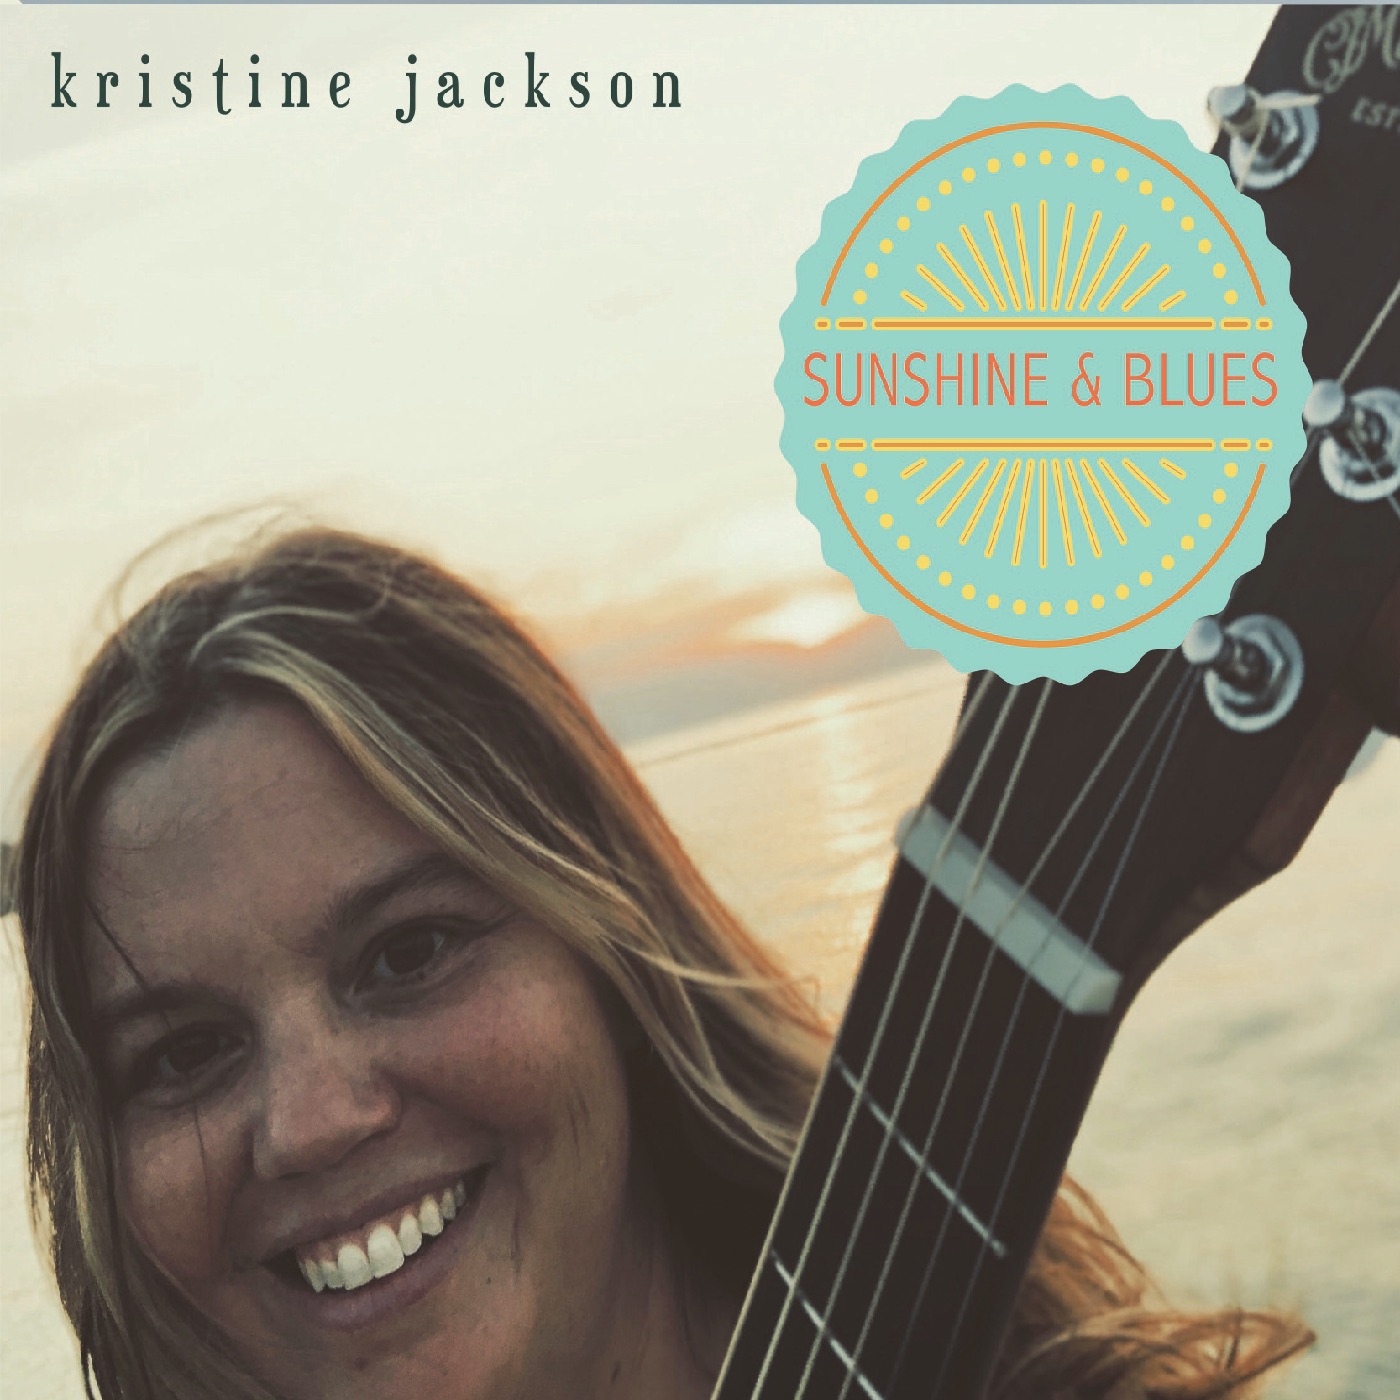 Art for You're No Good by Kristine Jackson